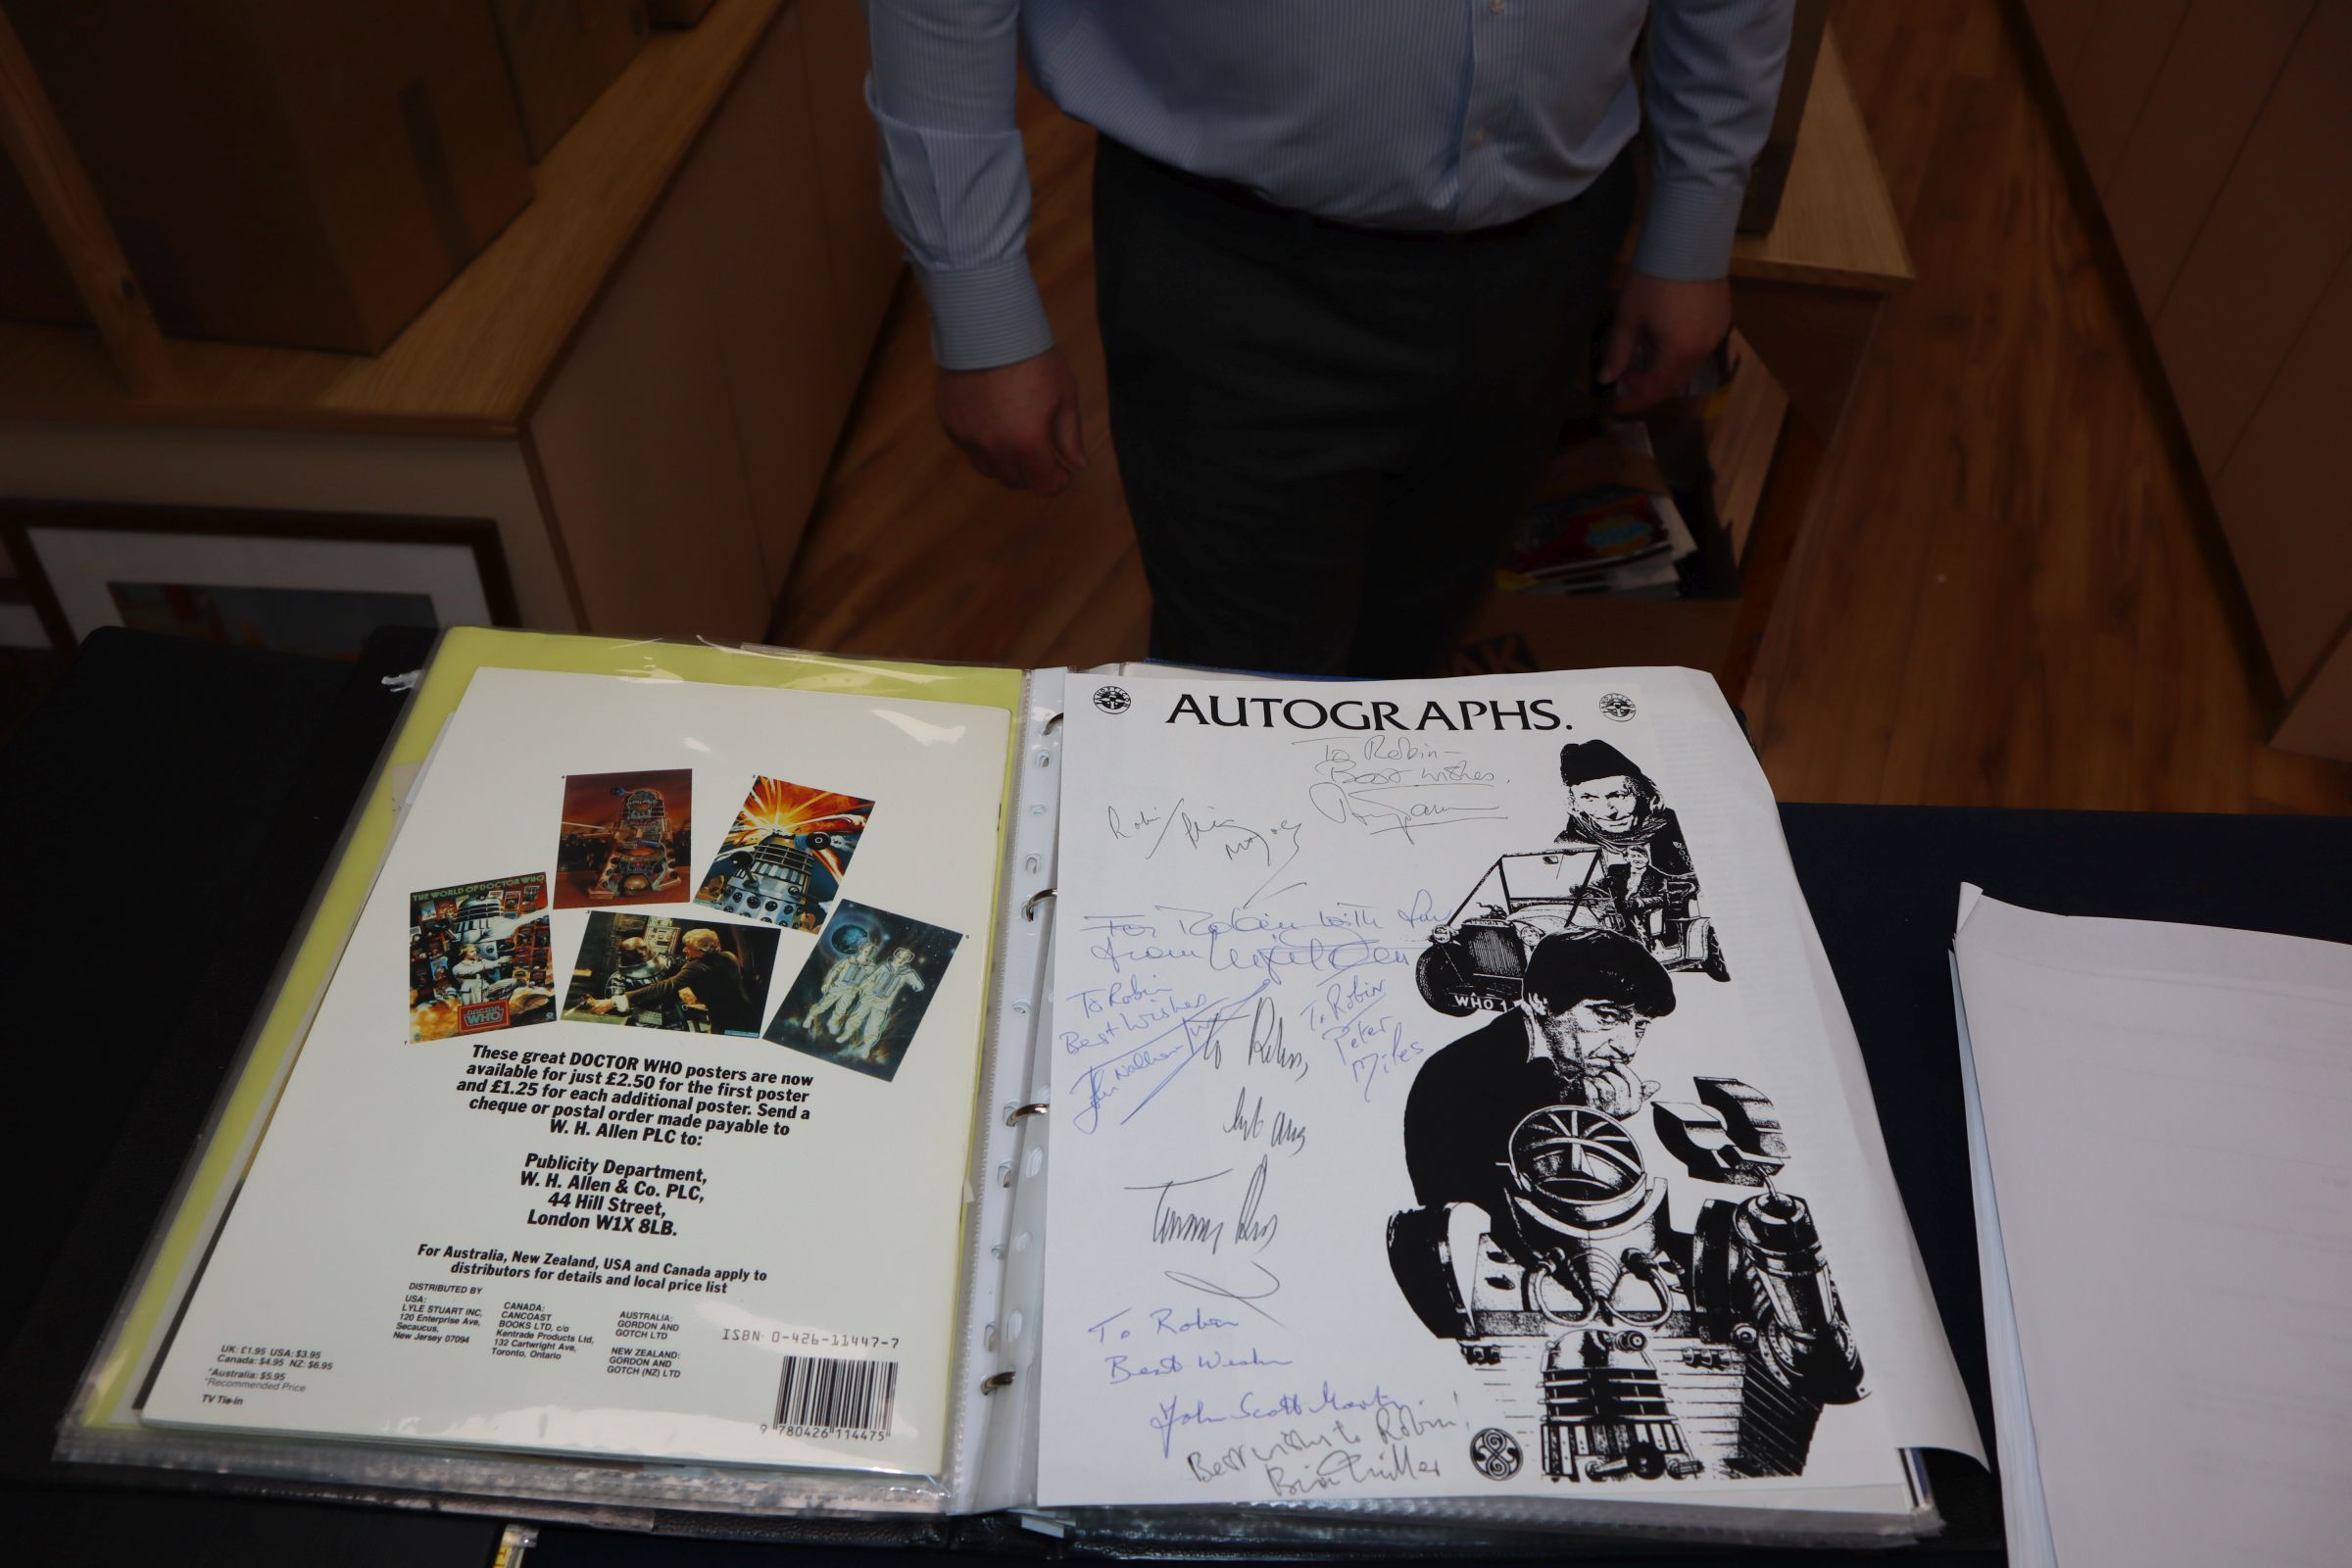 Doctor Who - Classic TV series - three albums photographs and comics signed by members of the cast - Image 15 of 30